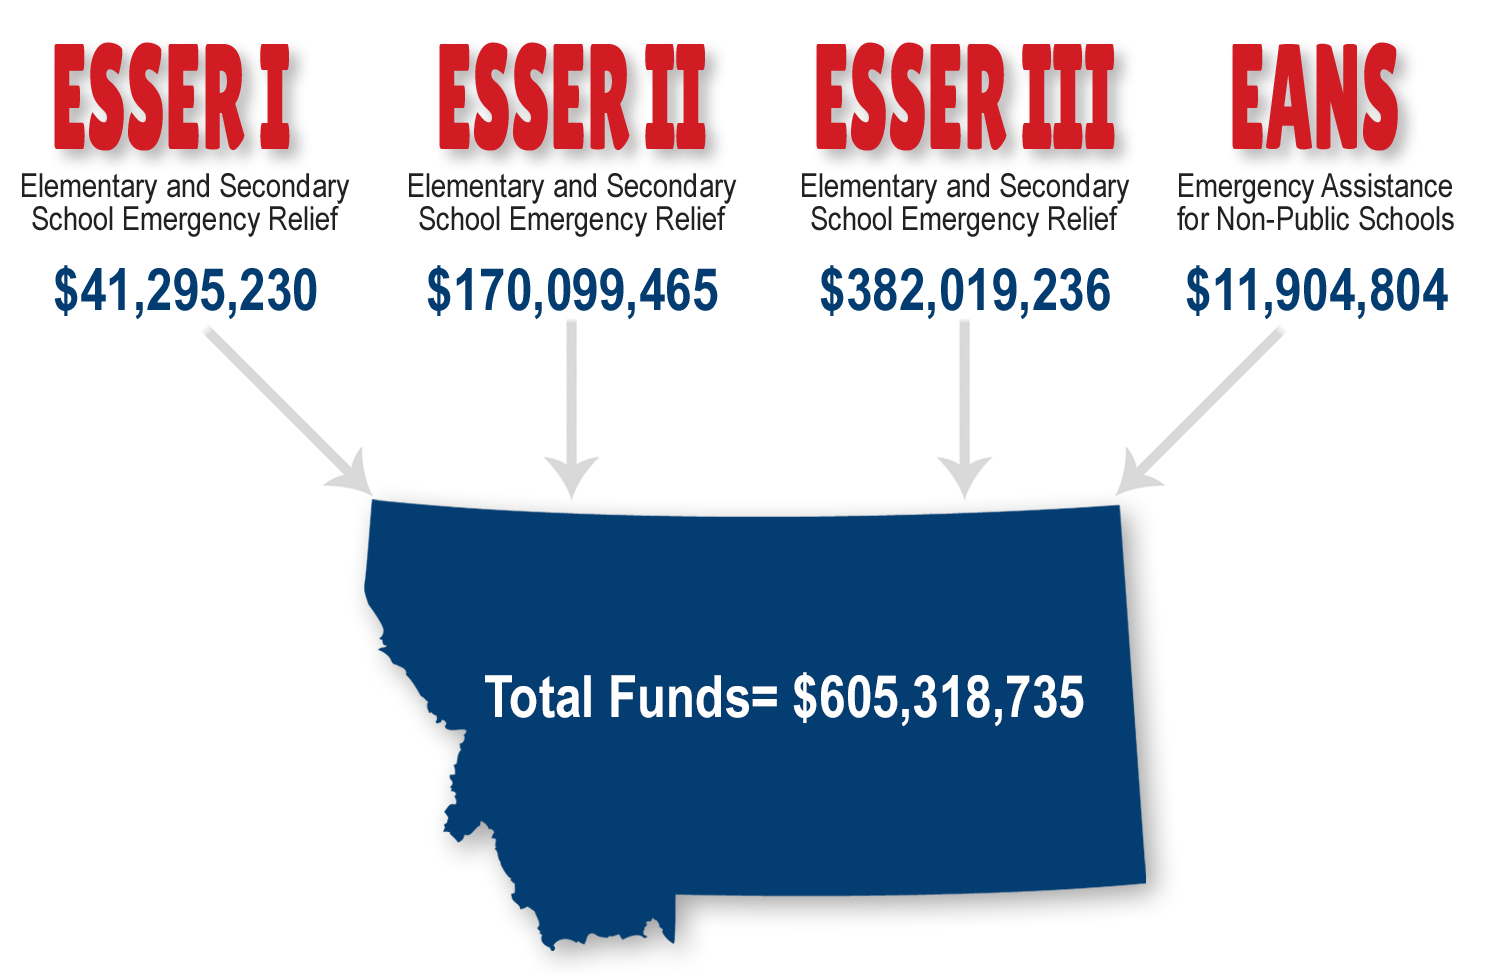 COVID-Related Funding Received for Public and Non-Public Schools Graphic: Elementary and Secondary School Emergency Relief (ESSER) I = $41,295,230; ESSER II = $170,099,465; ESSER III = $382,019,236; Emergency Assistance for Non-Public Schools (EANS) = $24,679,709; Total Funds = $605,318,735